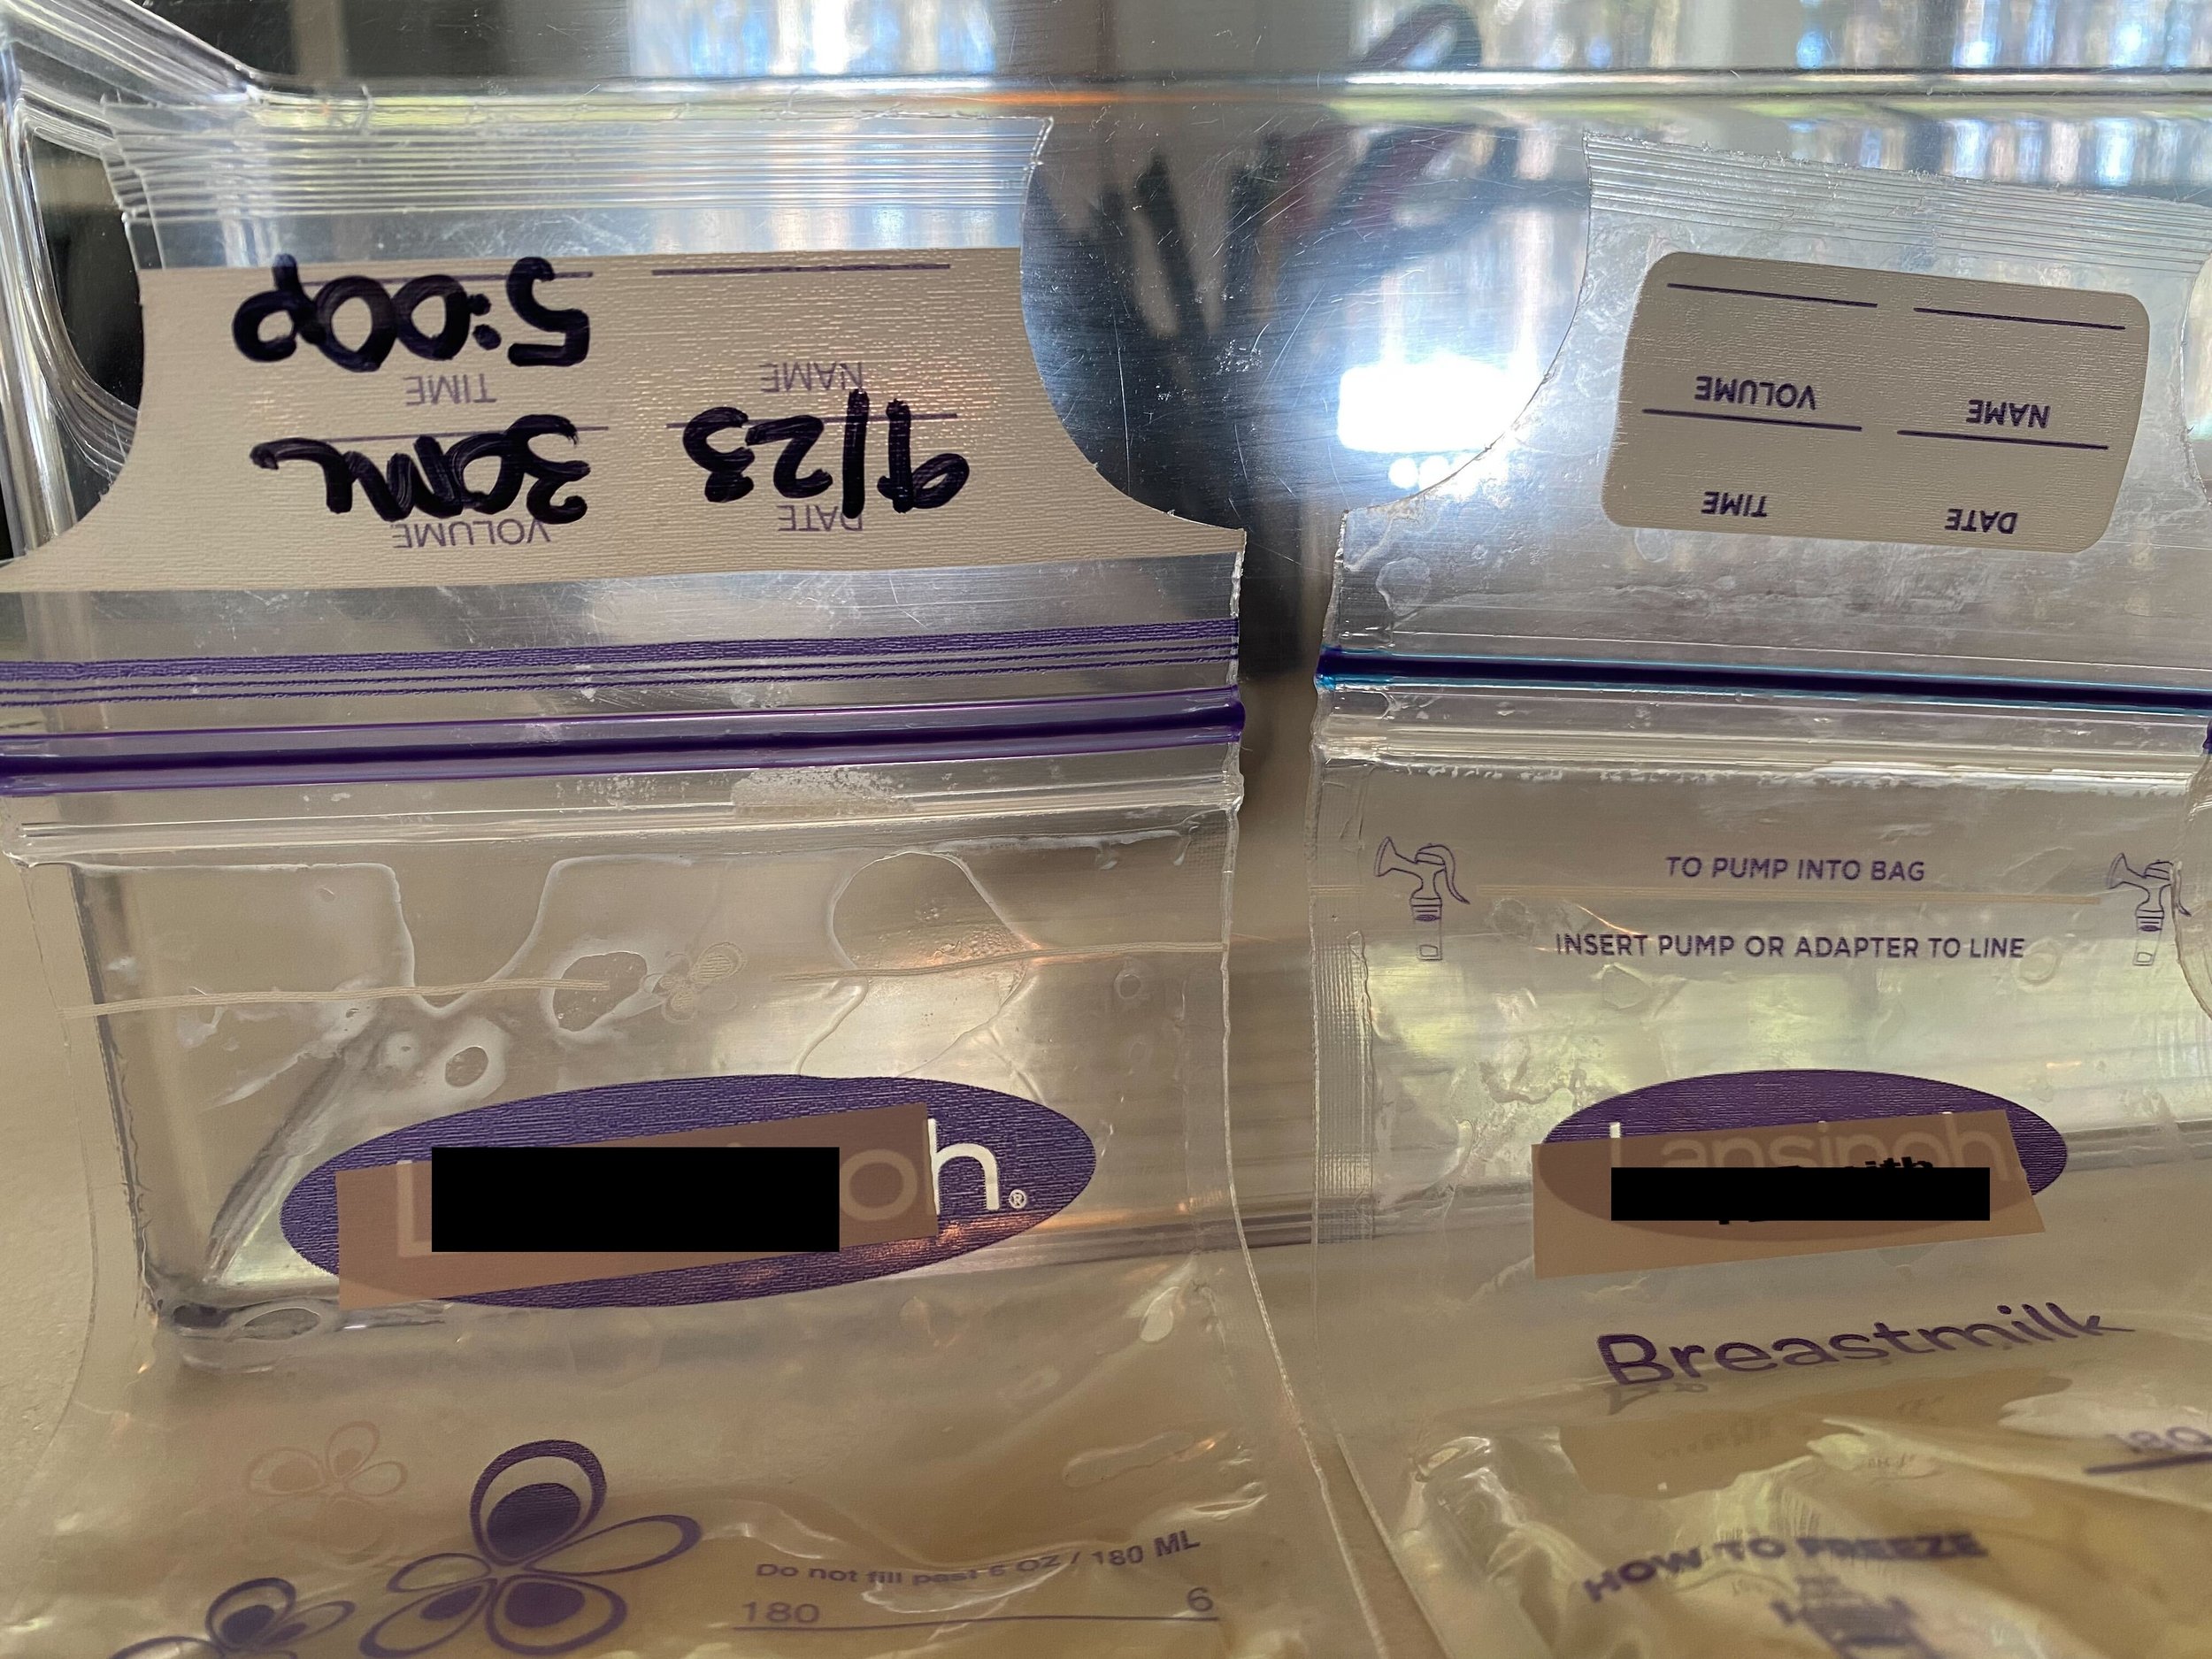 freezing breast milkpossibly a cheaper/better way than the bags